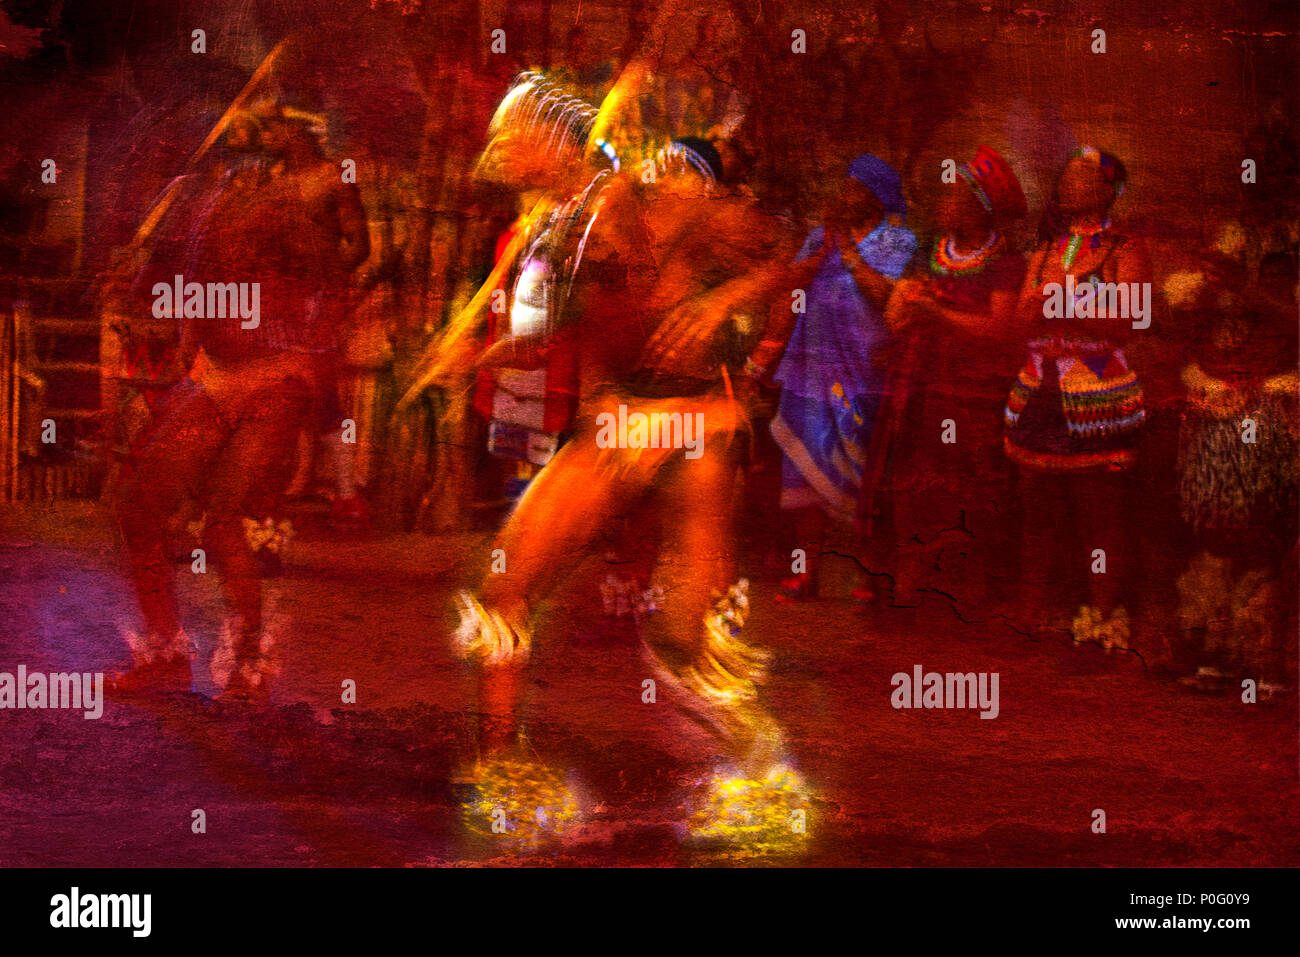 Brilliantly colored African Dancers in motion against a red textured background Stock Photo